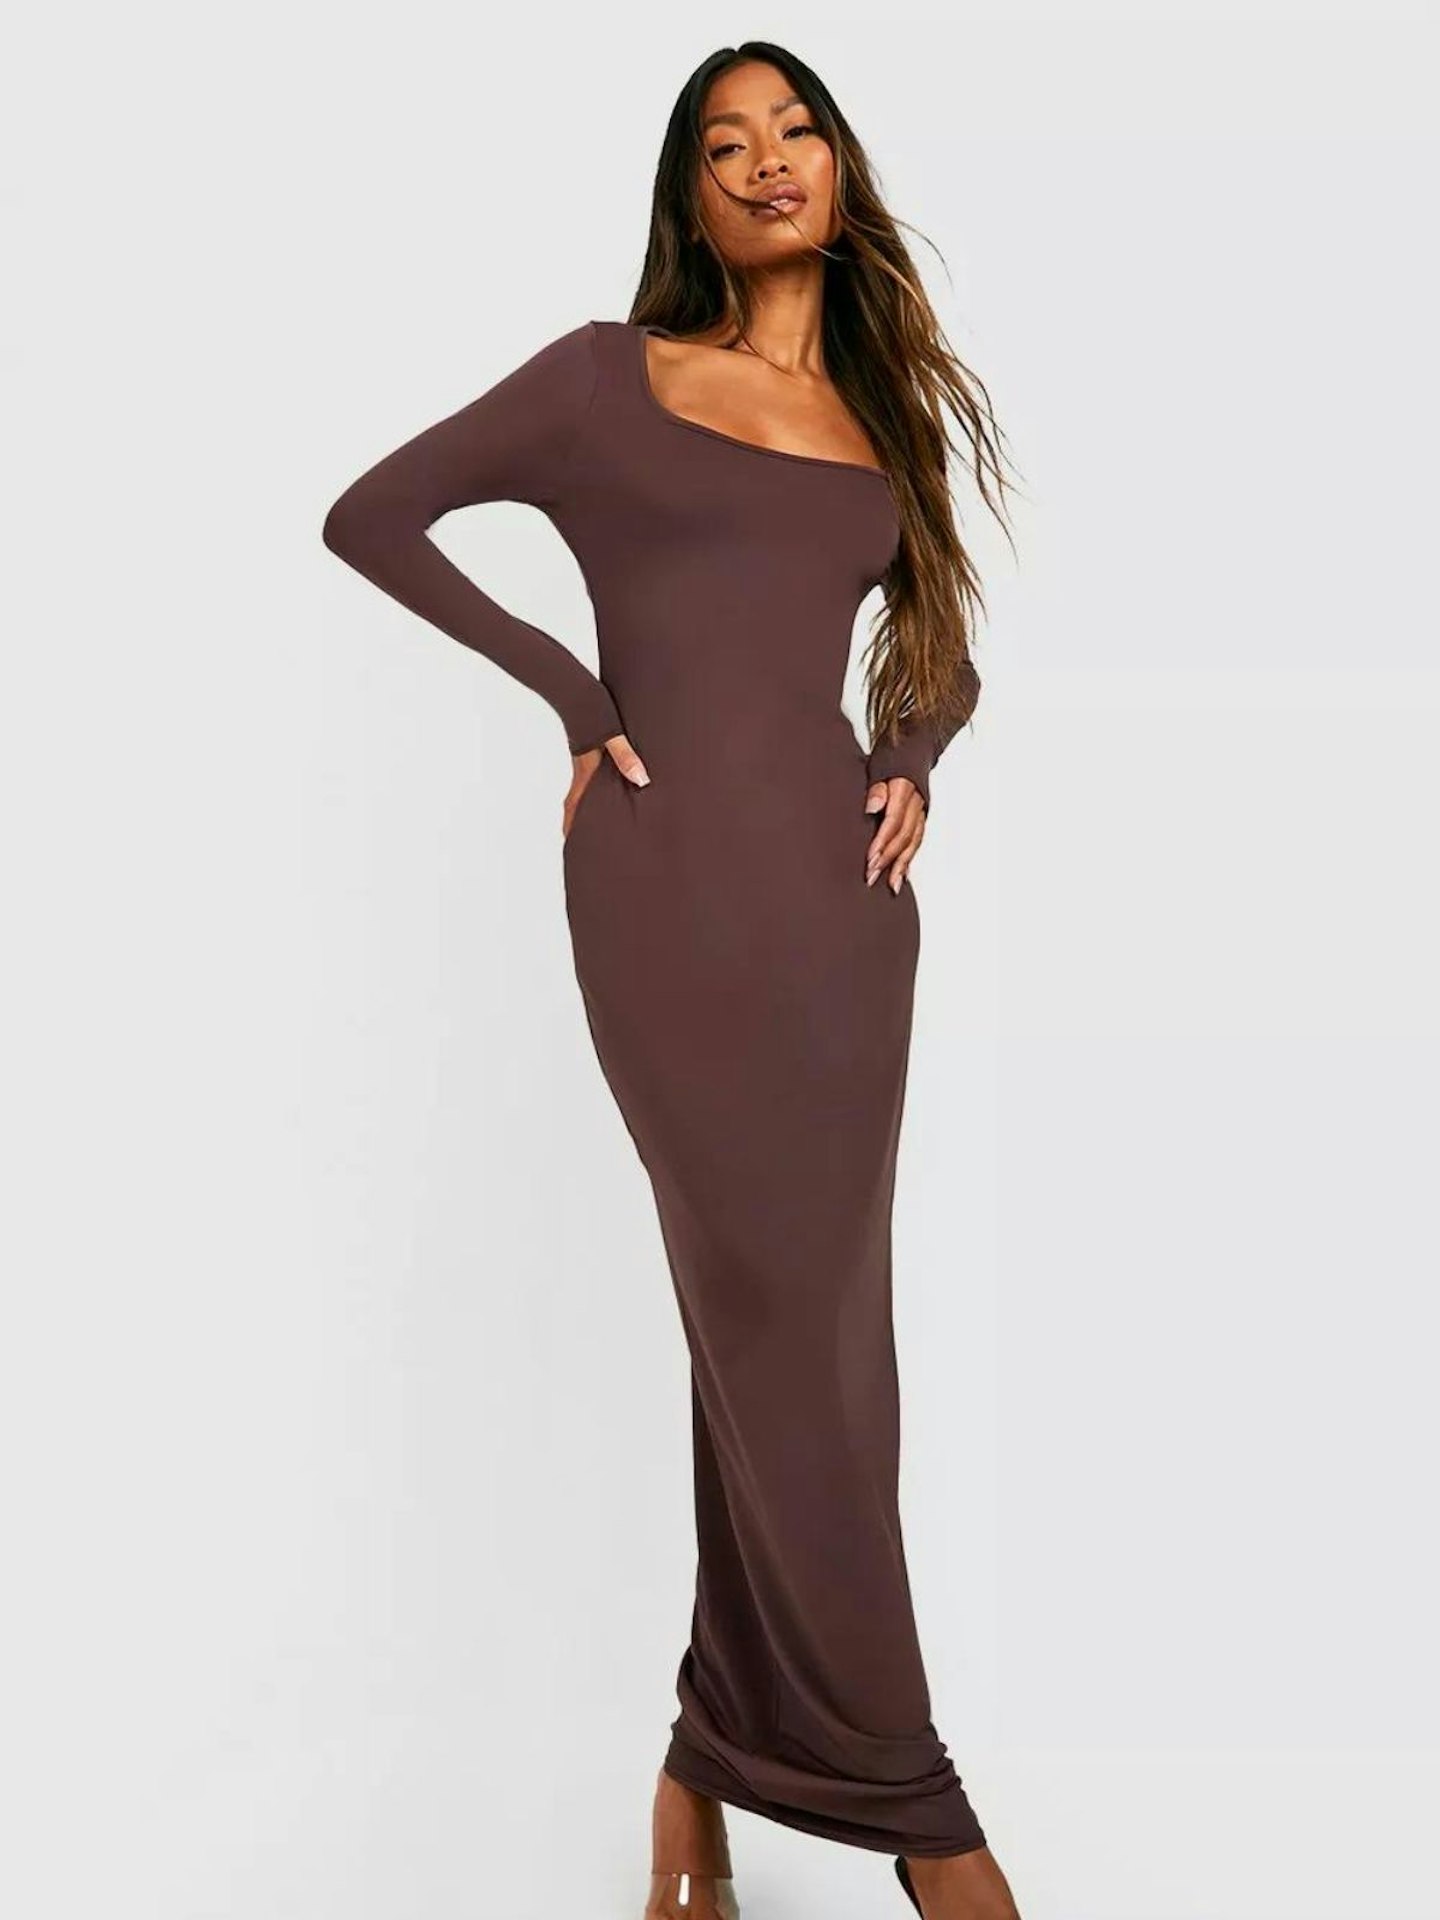 I'm a size 34D – my favorite dupe of Kim Kardashian's Skims costs